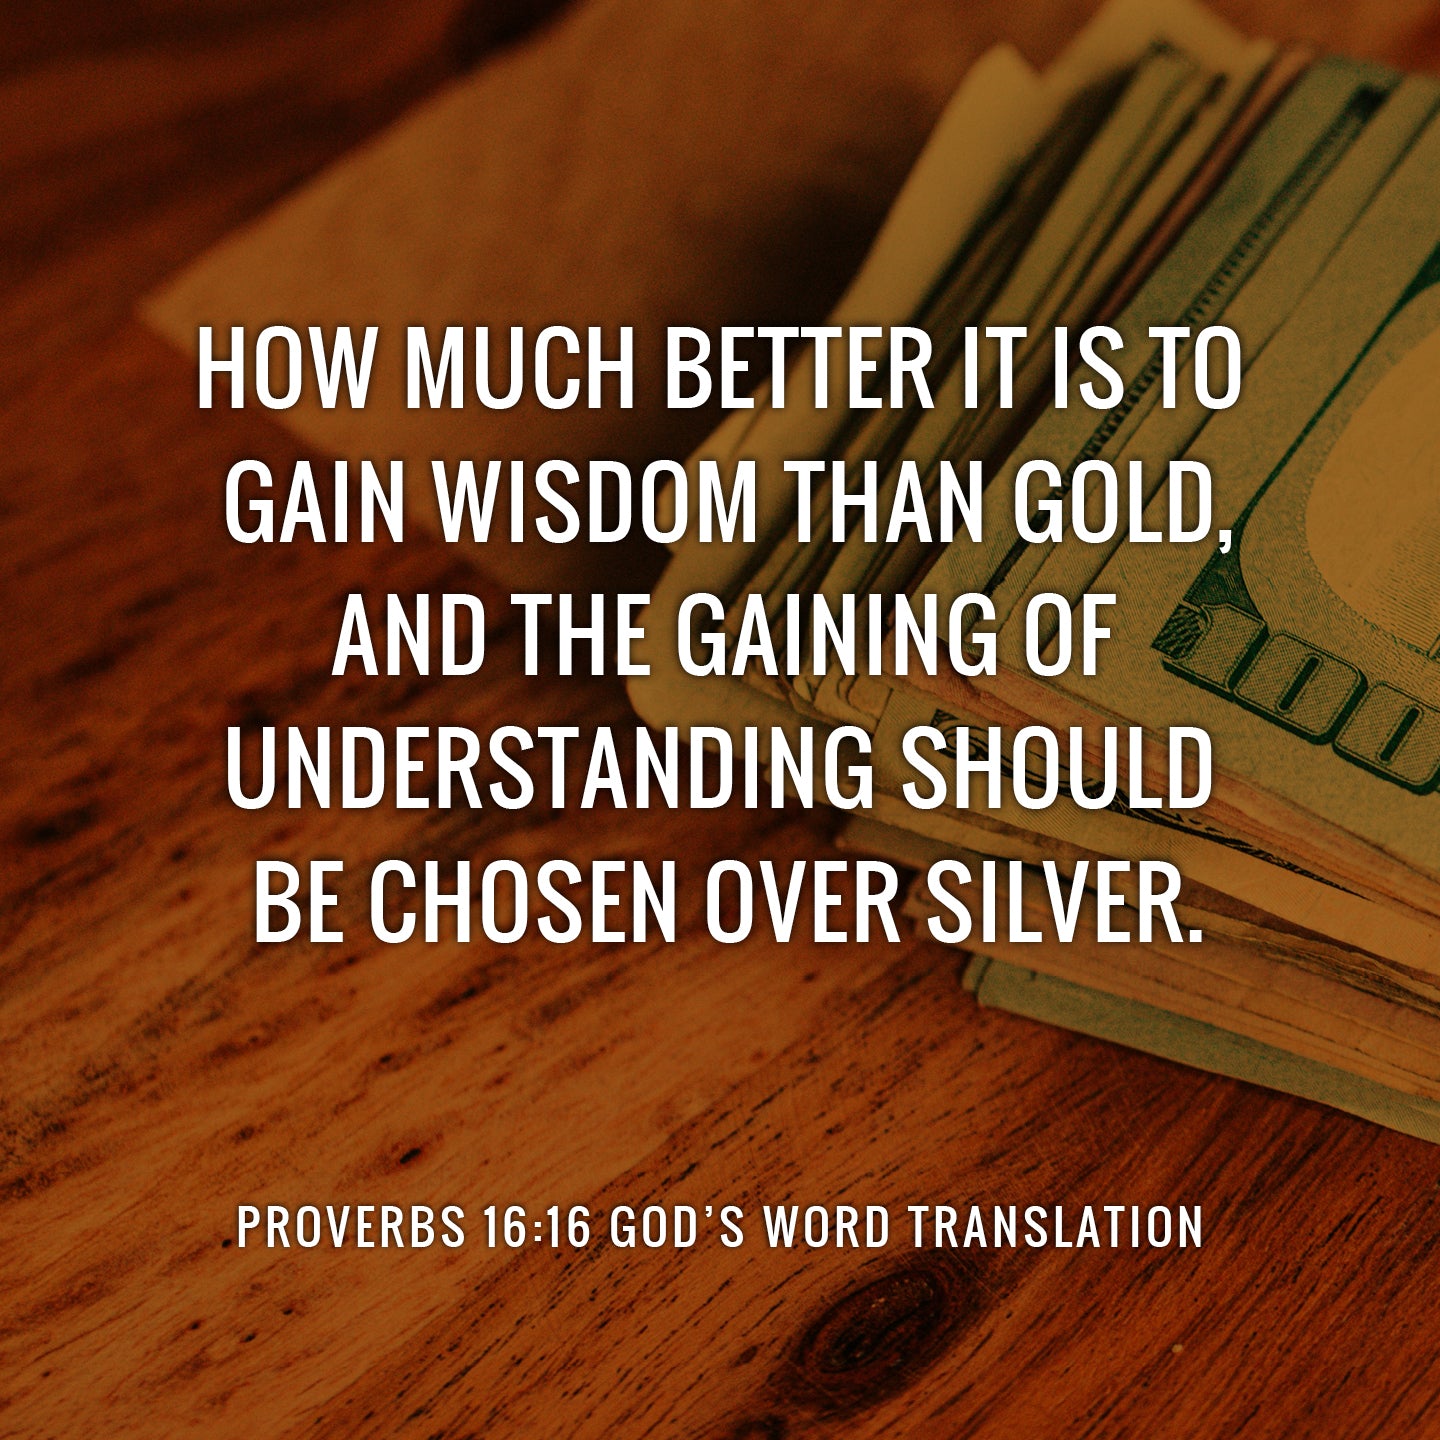 Compare Proverbs 16:16-17 much better it is to gain wisdom than